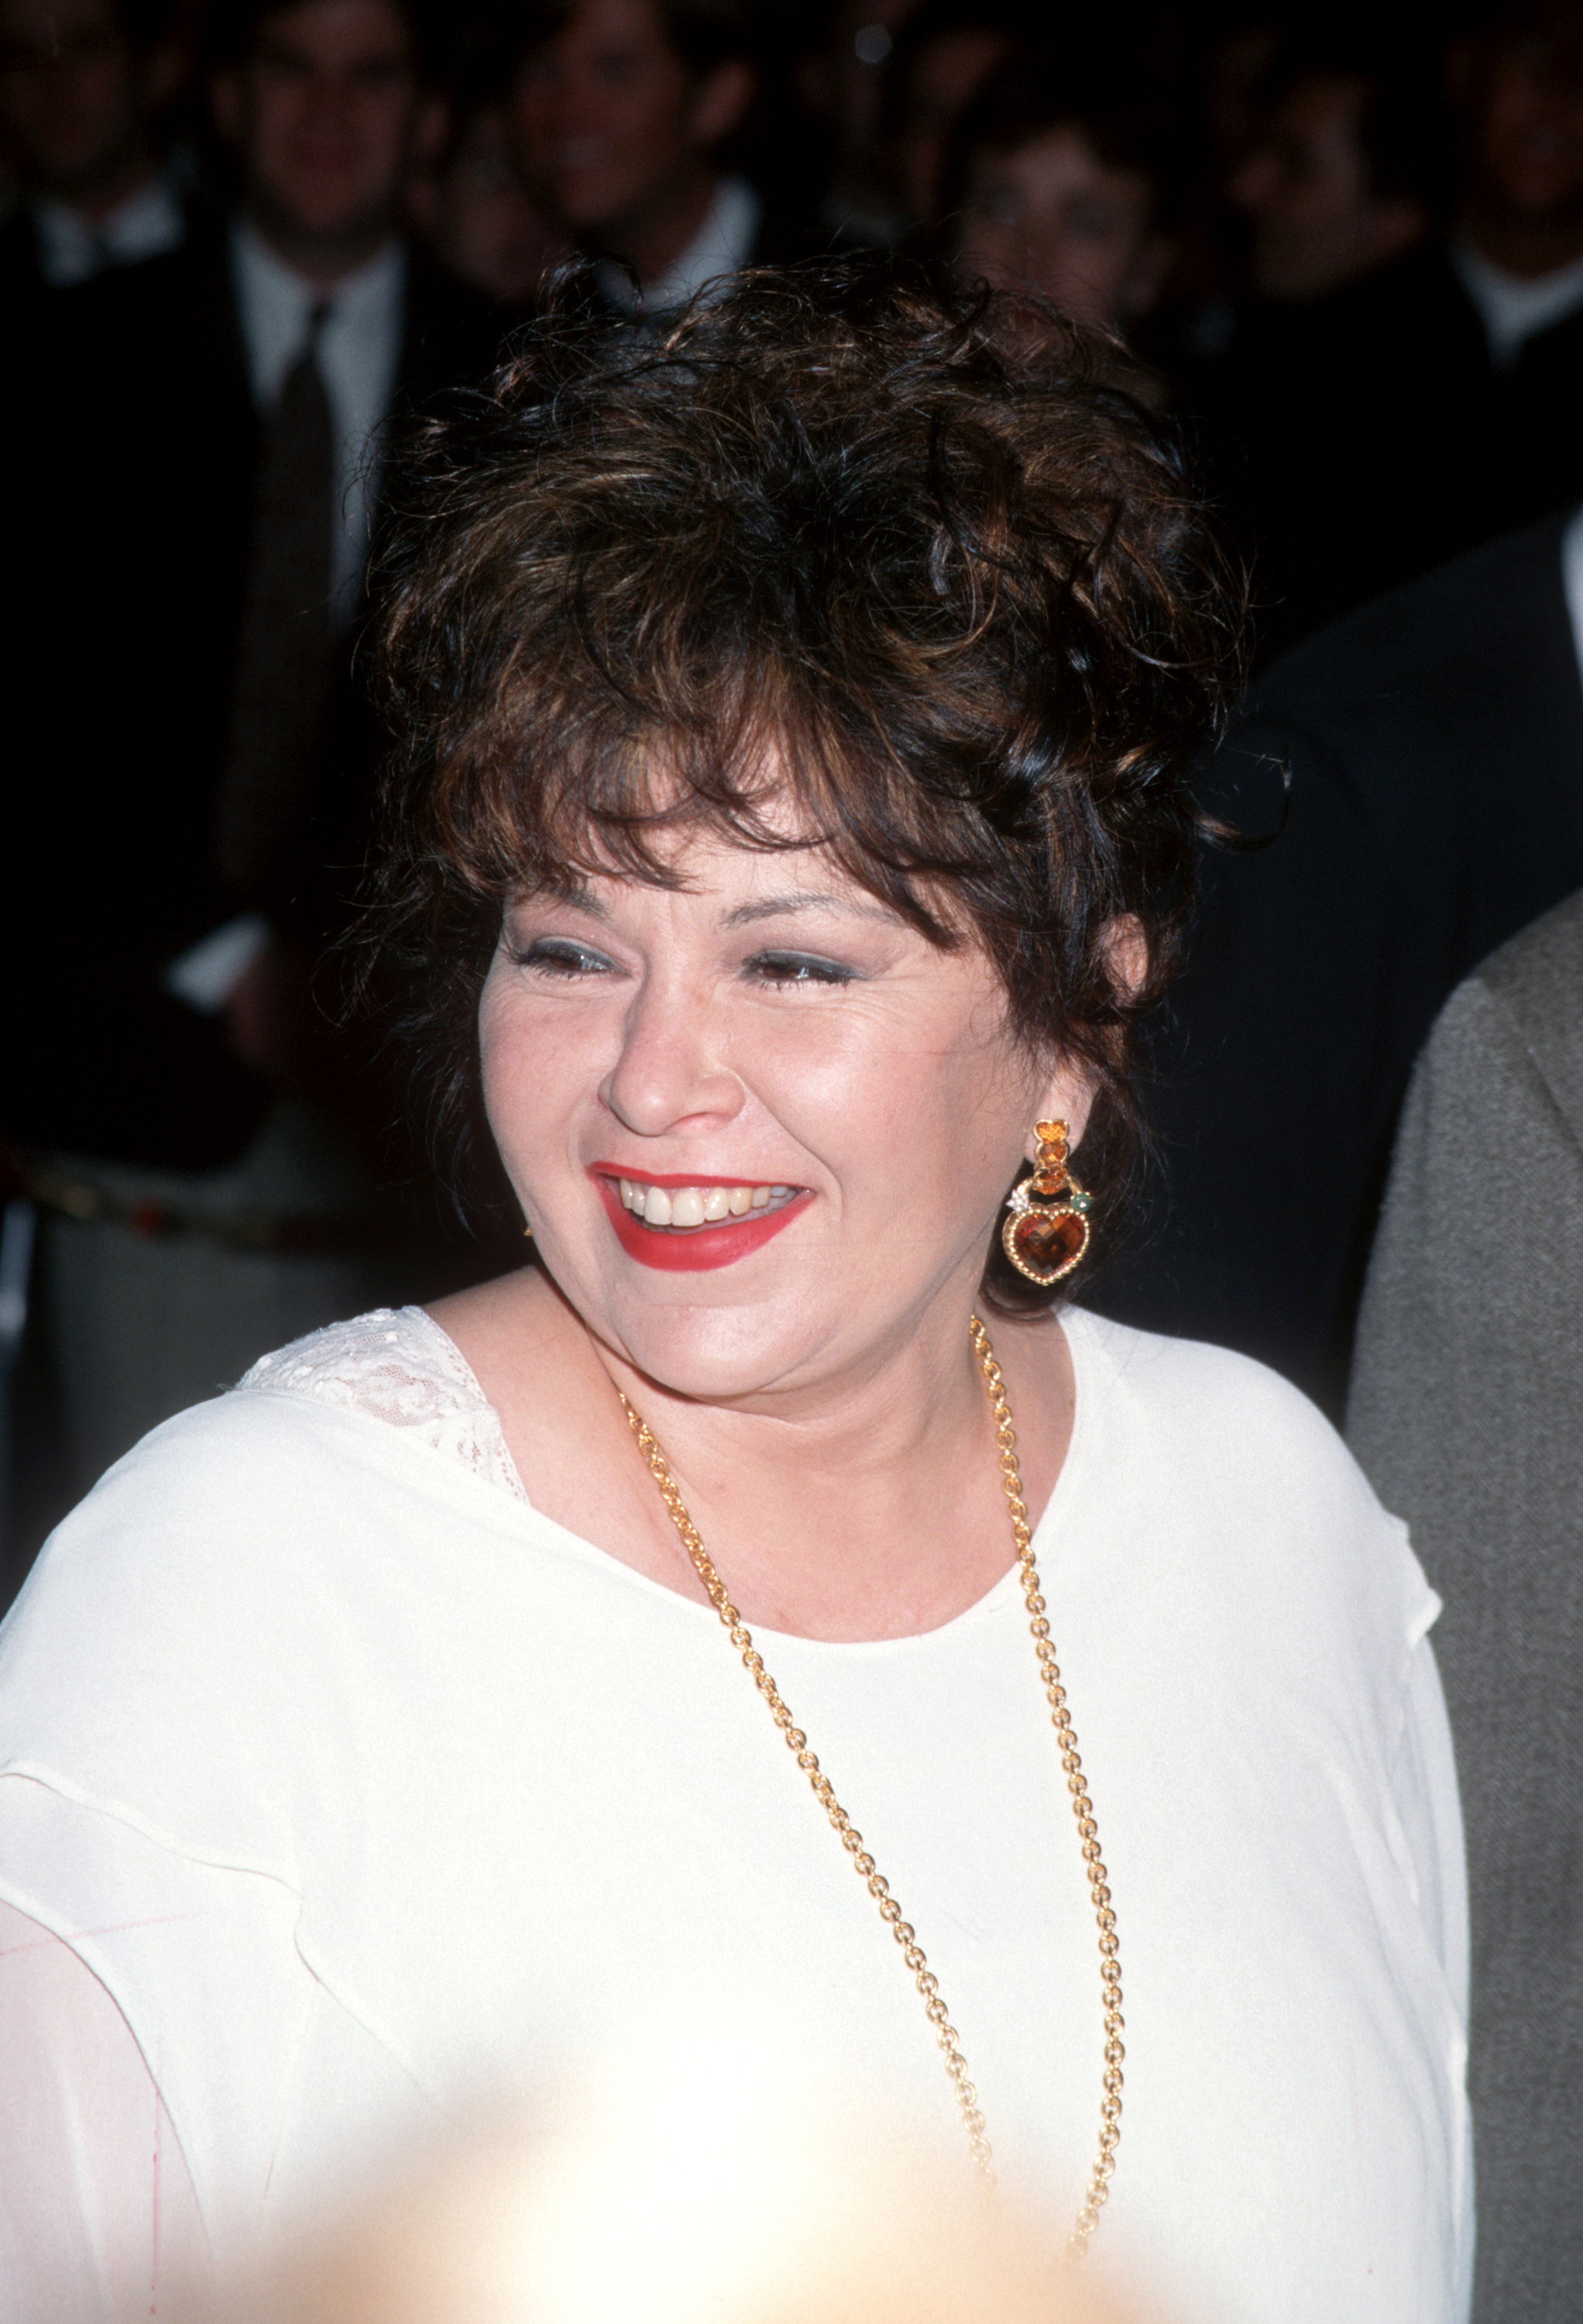 Actress Roseanne Barr during the 6th Annual GLAAD Media Awards at Century Plaza Hotel on March 12, 1995 in Century City, California | Source: Getty Images